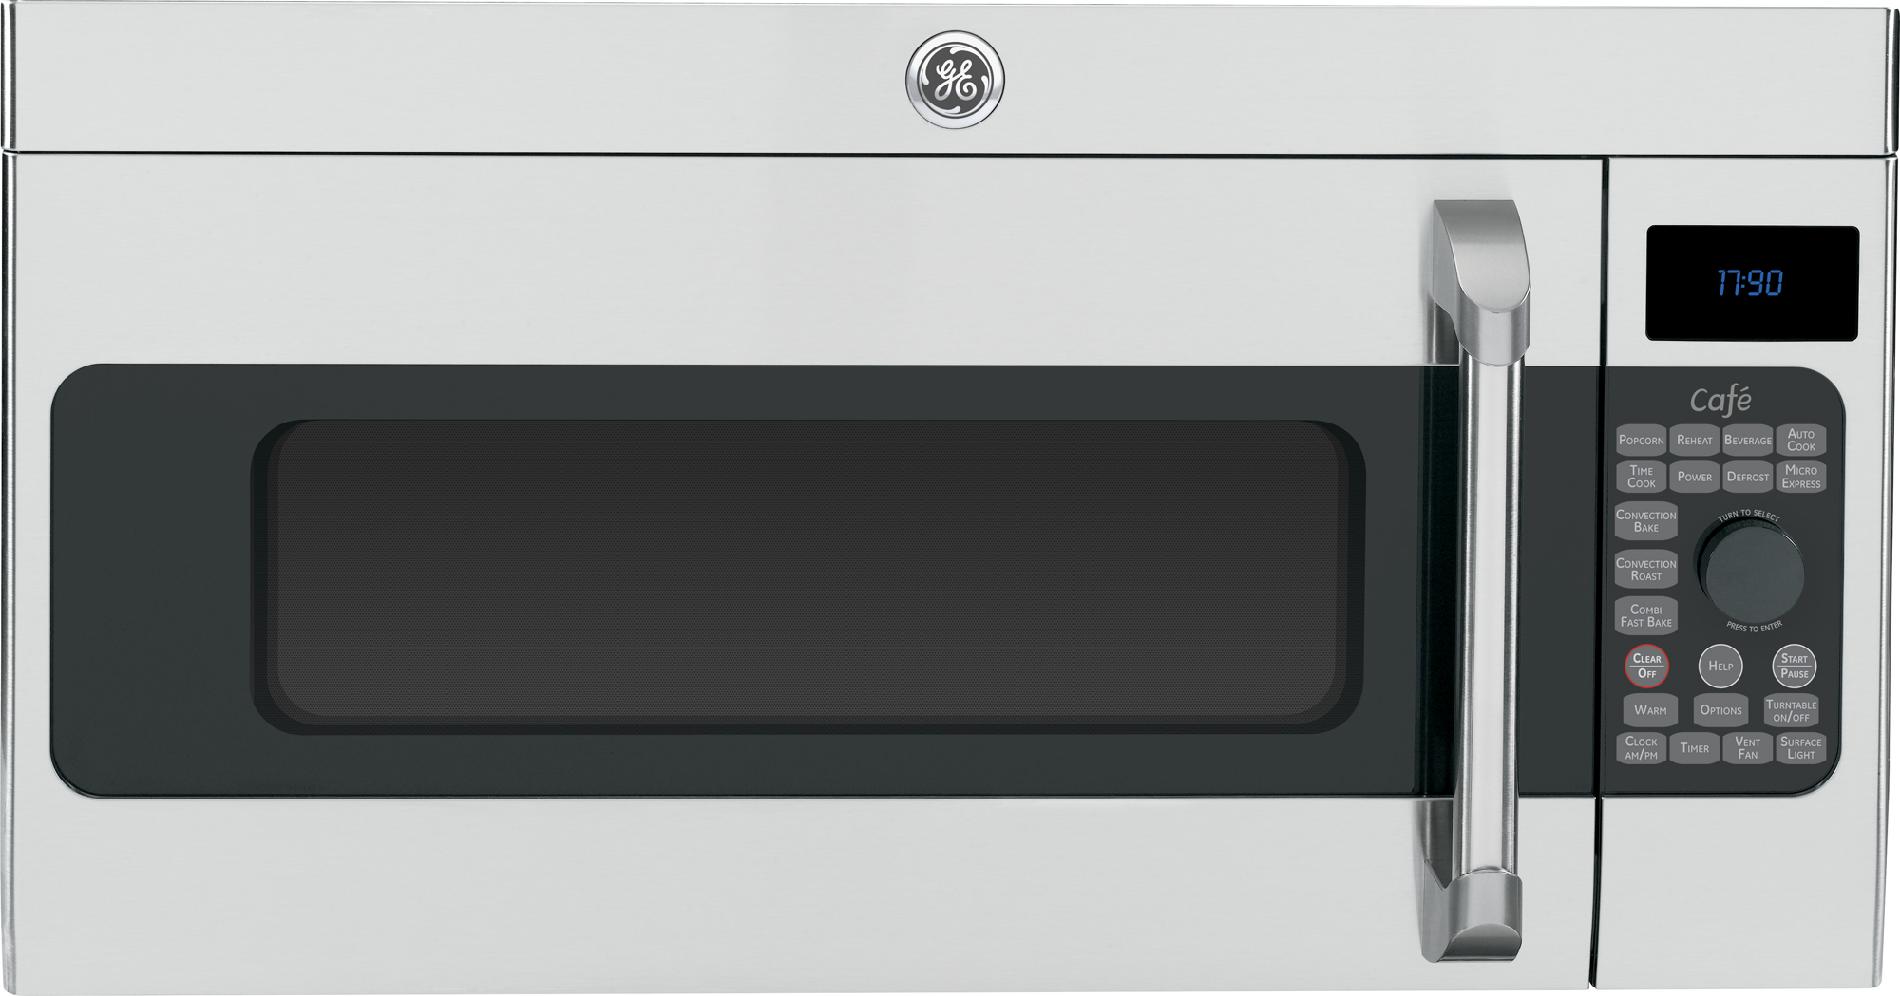 GE Caf? Series 1.7 cu. ft. Over-the-Range Microwave Oven w/ Convection - Stainless Steel